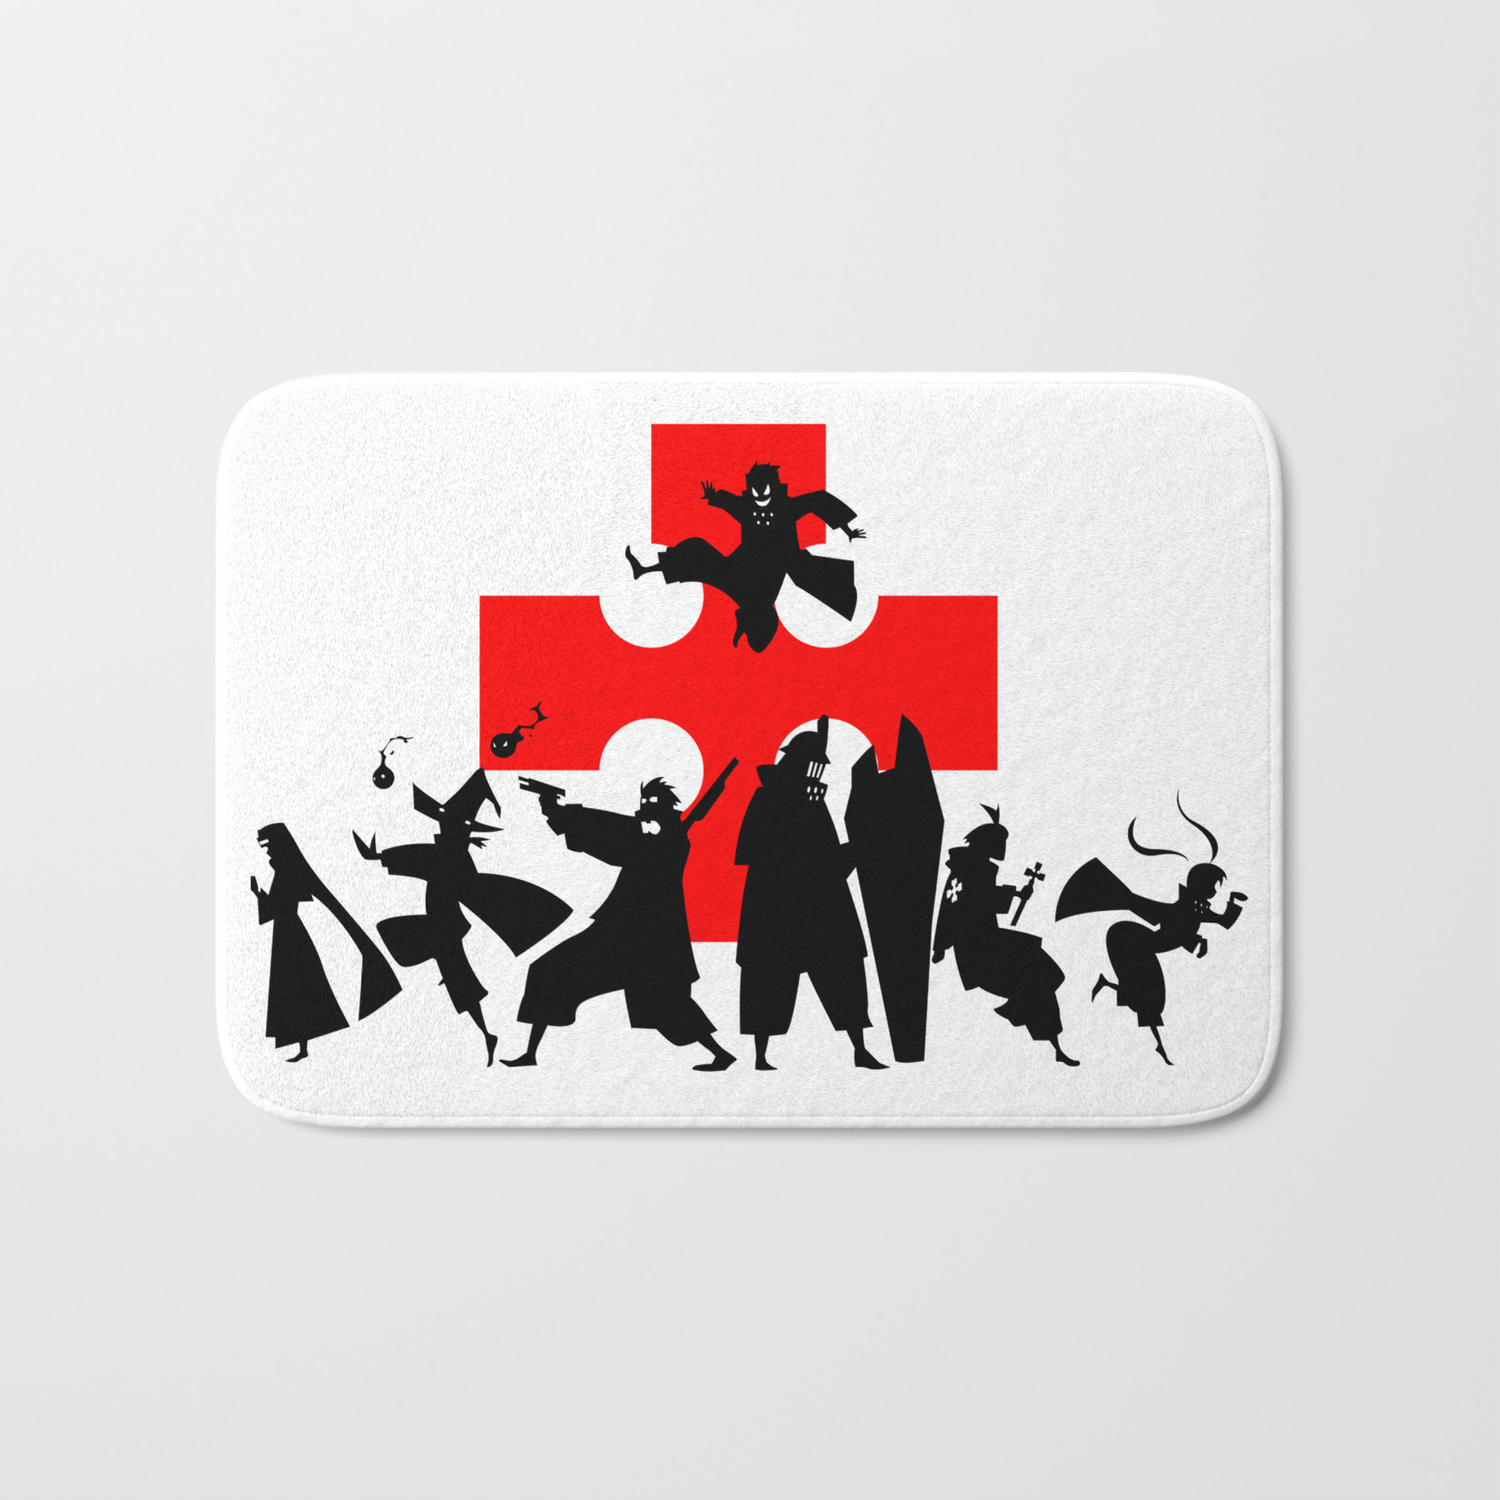 Fire Force First Anime Intro Image Bath Mat by Graphic Bazaar | Society6